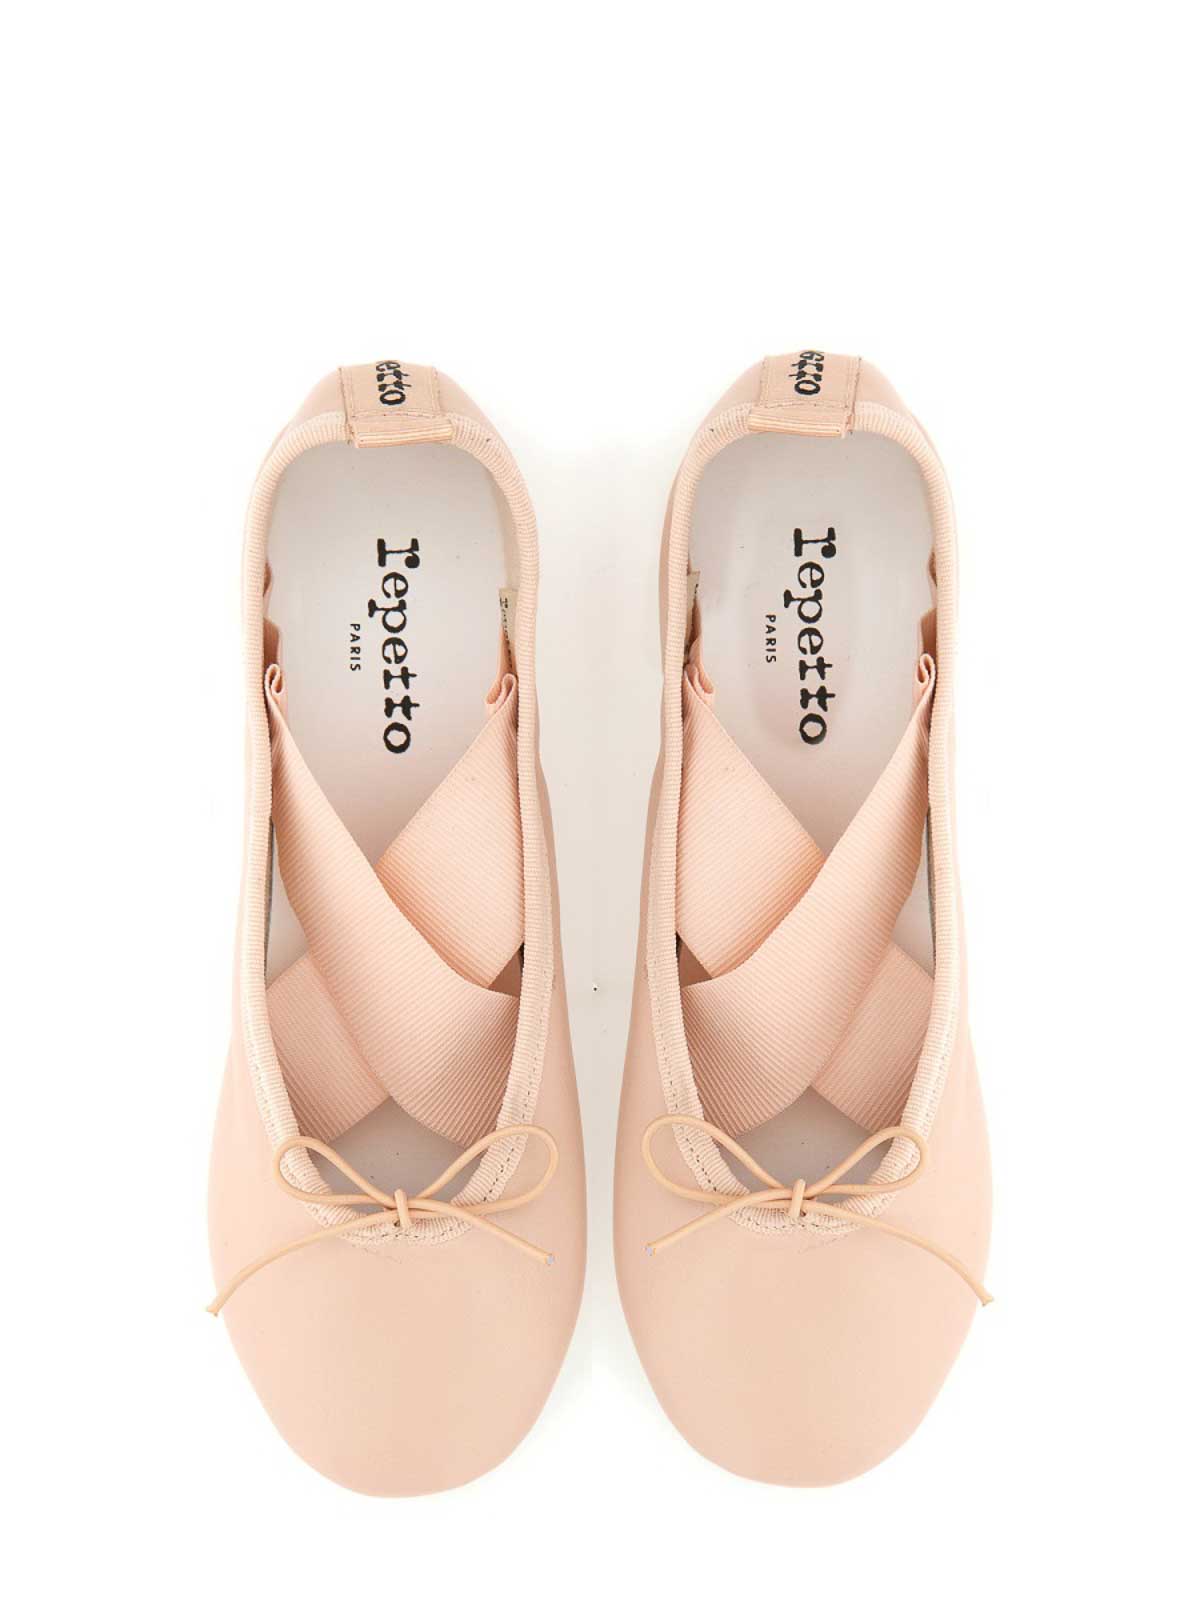 Shop Repetto Flat Shoes Janna In Nude & Neutrals